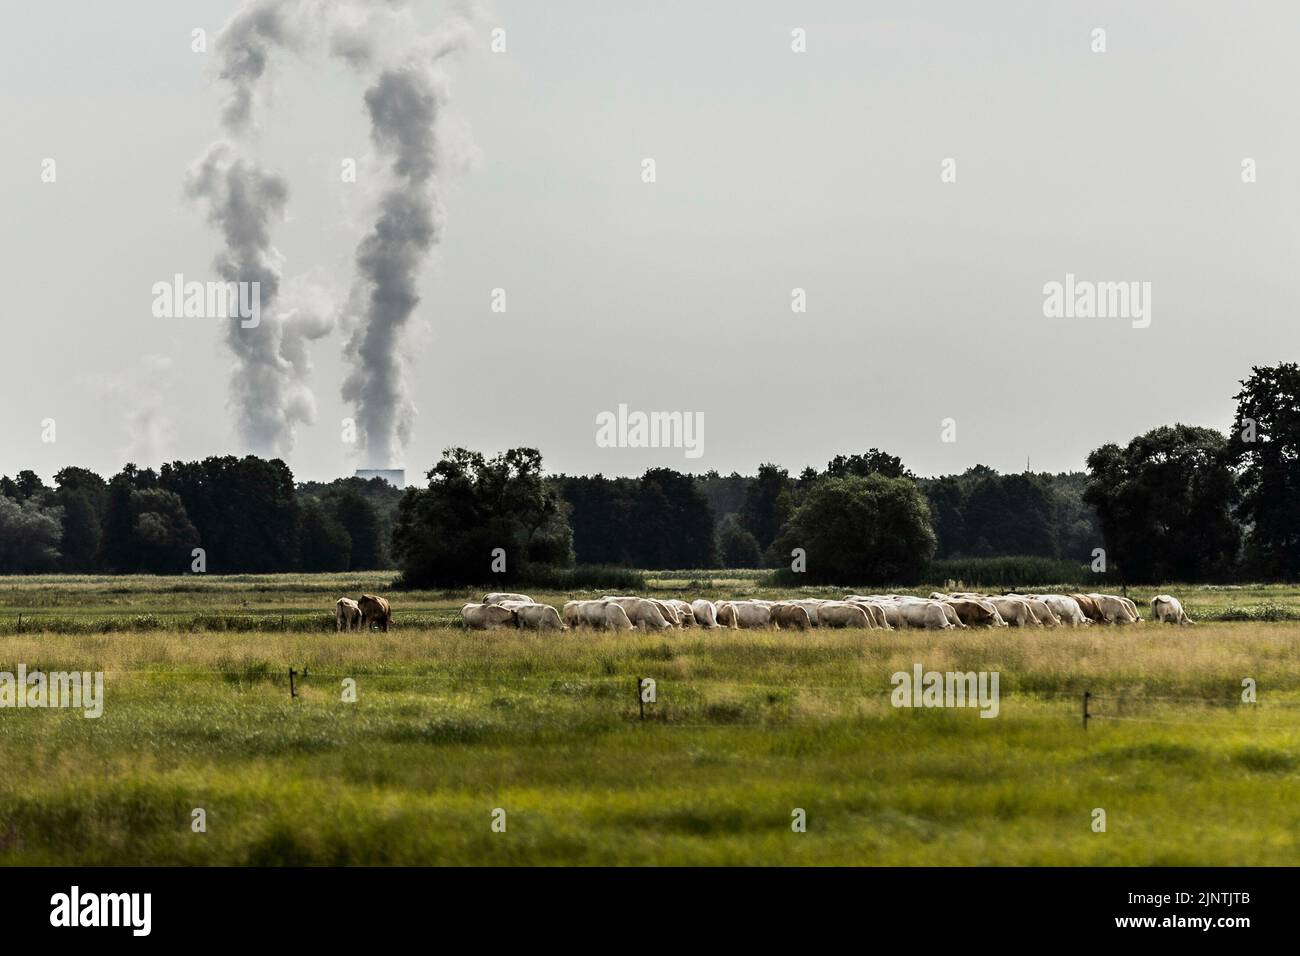 The Jaenschwalde coal-fired power plant is visible behind a herd of cows in Dissen-Striesow, July 28, 2022. According to the federal government's timetable for phasing out coal, the last block of the power plant is to be shut down by the end of 2028. In addition to Boxberg and Schwarze Pumpe, Jaenschwalde is one of three power plants in Lusatia whose economic infrastructure is largely dependent on coal production. Stock Photo